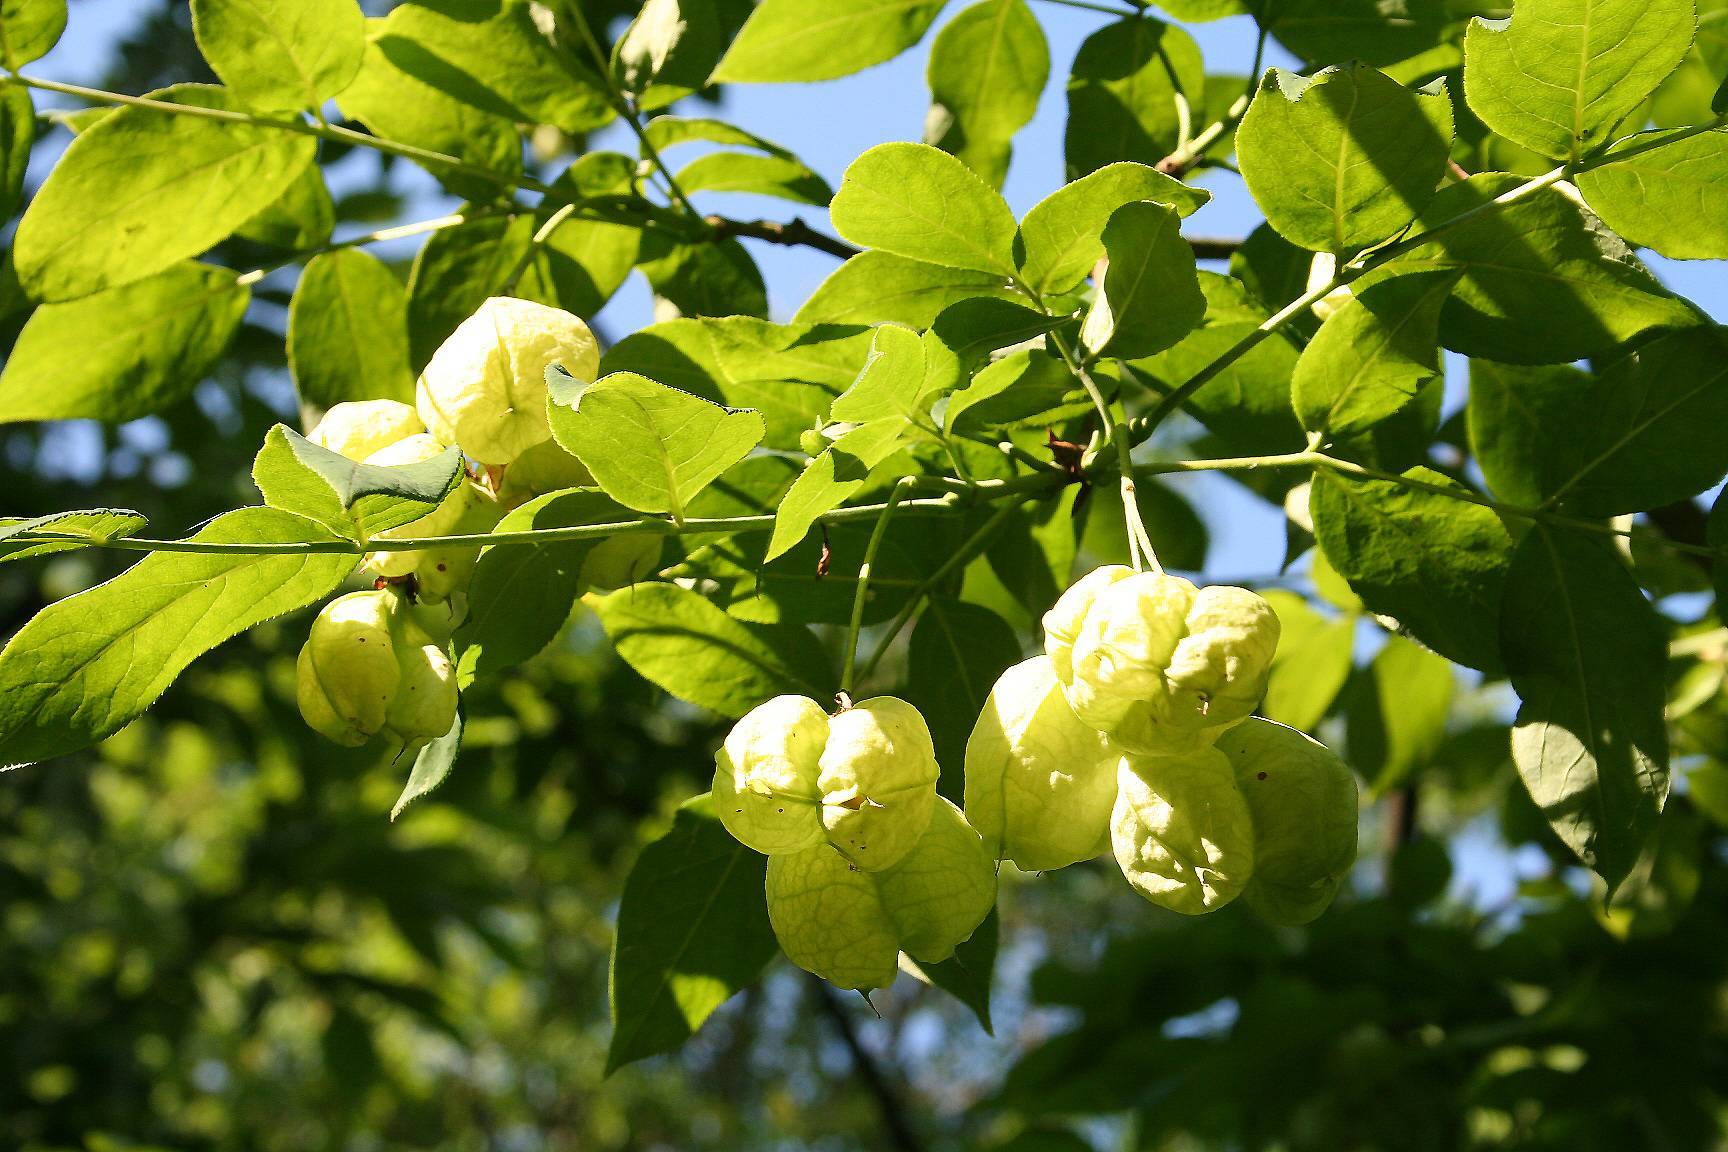 yellow fruits, lime-green leaves with green stems